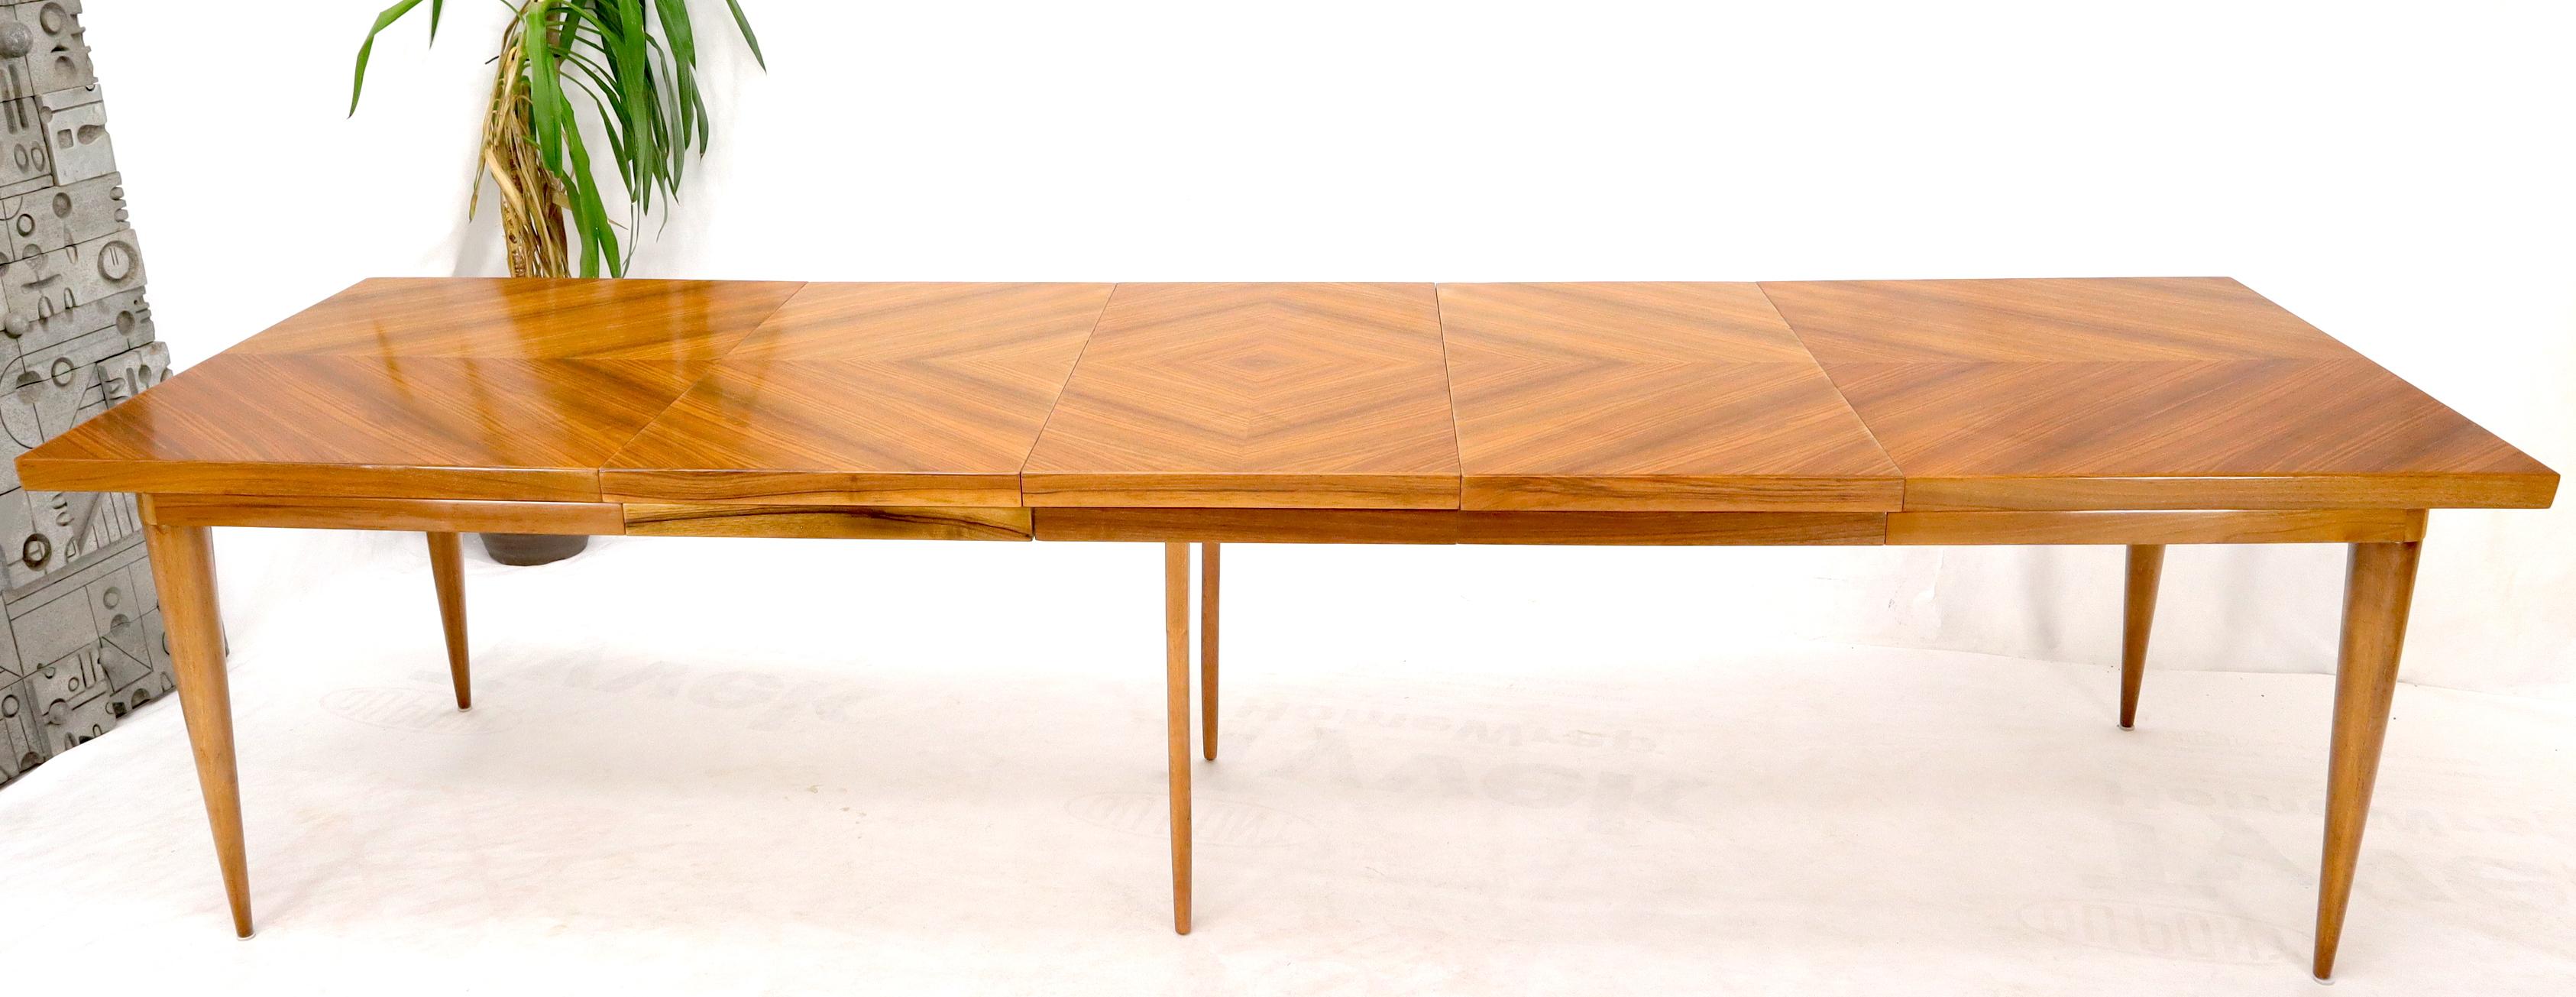 Mid-Century Modern - Art Deco influence large rectangle dining table on heavy solid walnut round tapered legs by Erno Fabry made in Germany. Superior craftsmanship and materials. 3 x 20.5